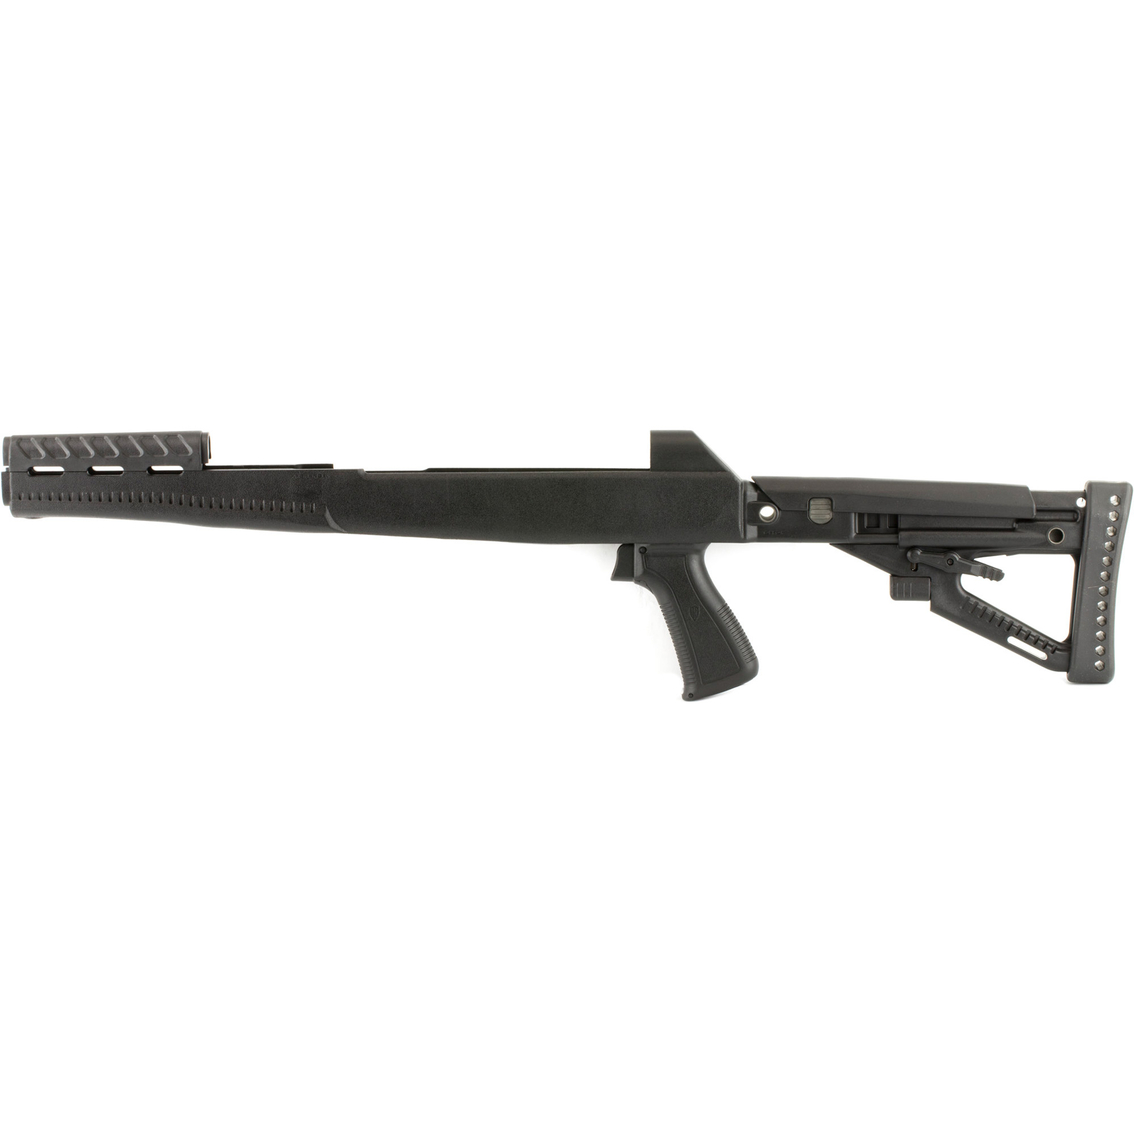 ProMag Archangel OPFOR Collapsible Pistol Grip Stock Fits SKS Rifles Black - Image 2 of 2